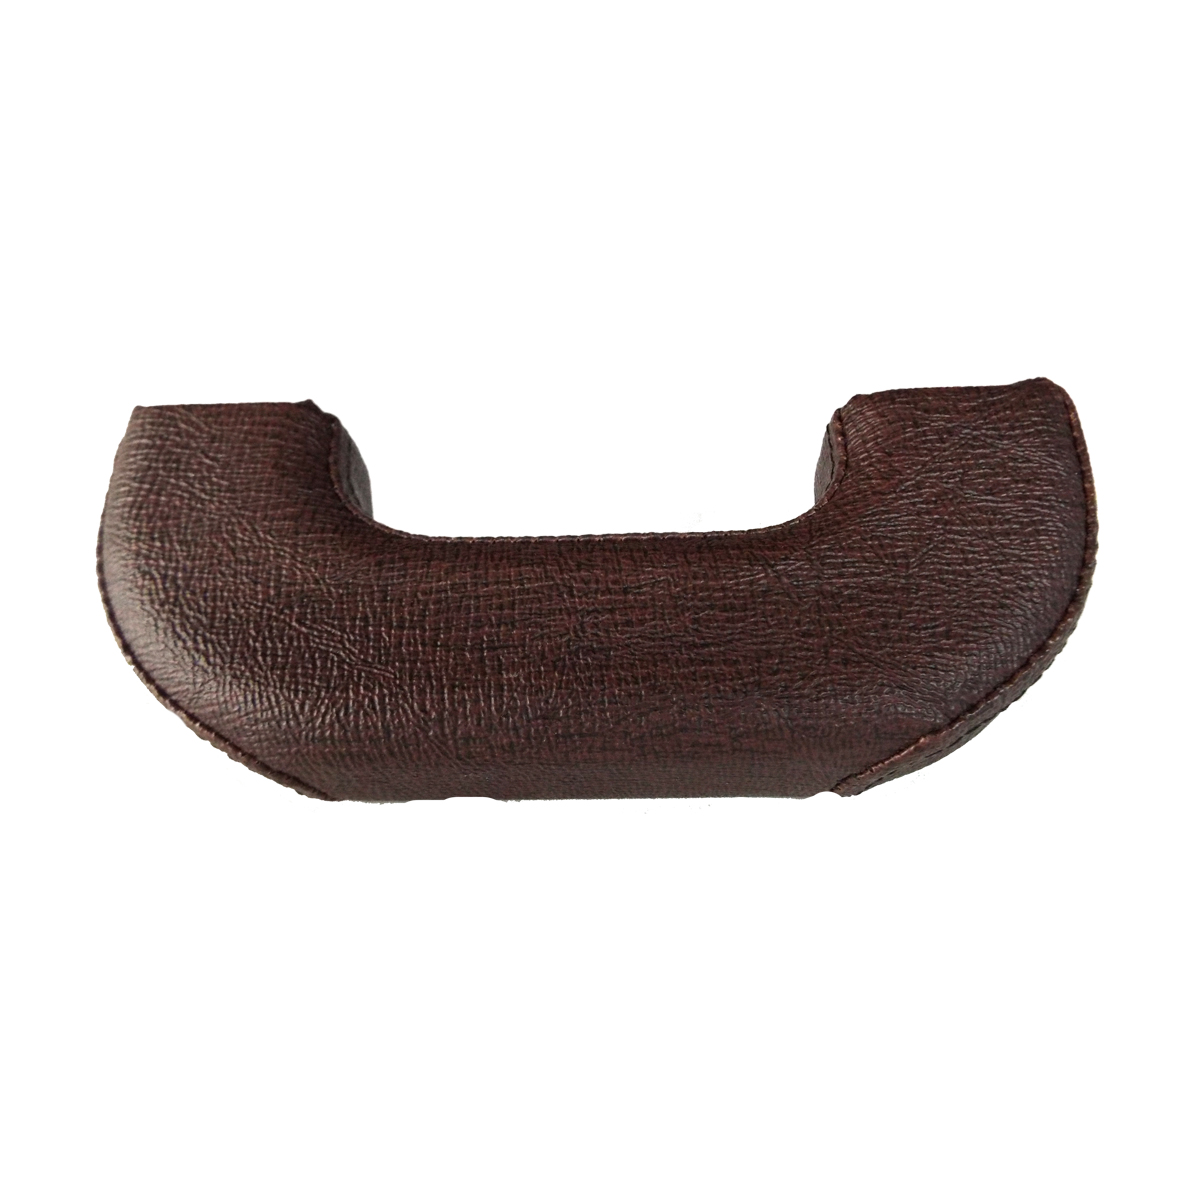 1947-1955 Arm Rest Brown Matches Deluxes Door Panels Chevrolet and GMC Pickup Truck